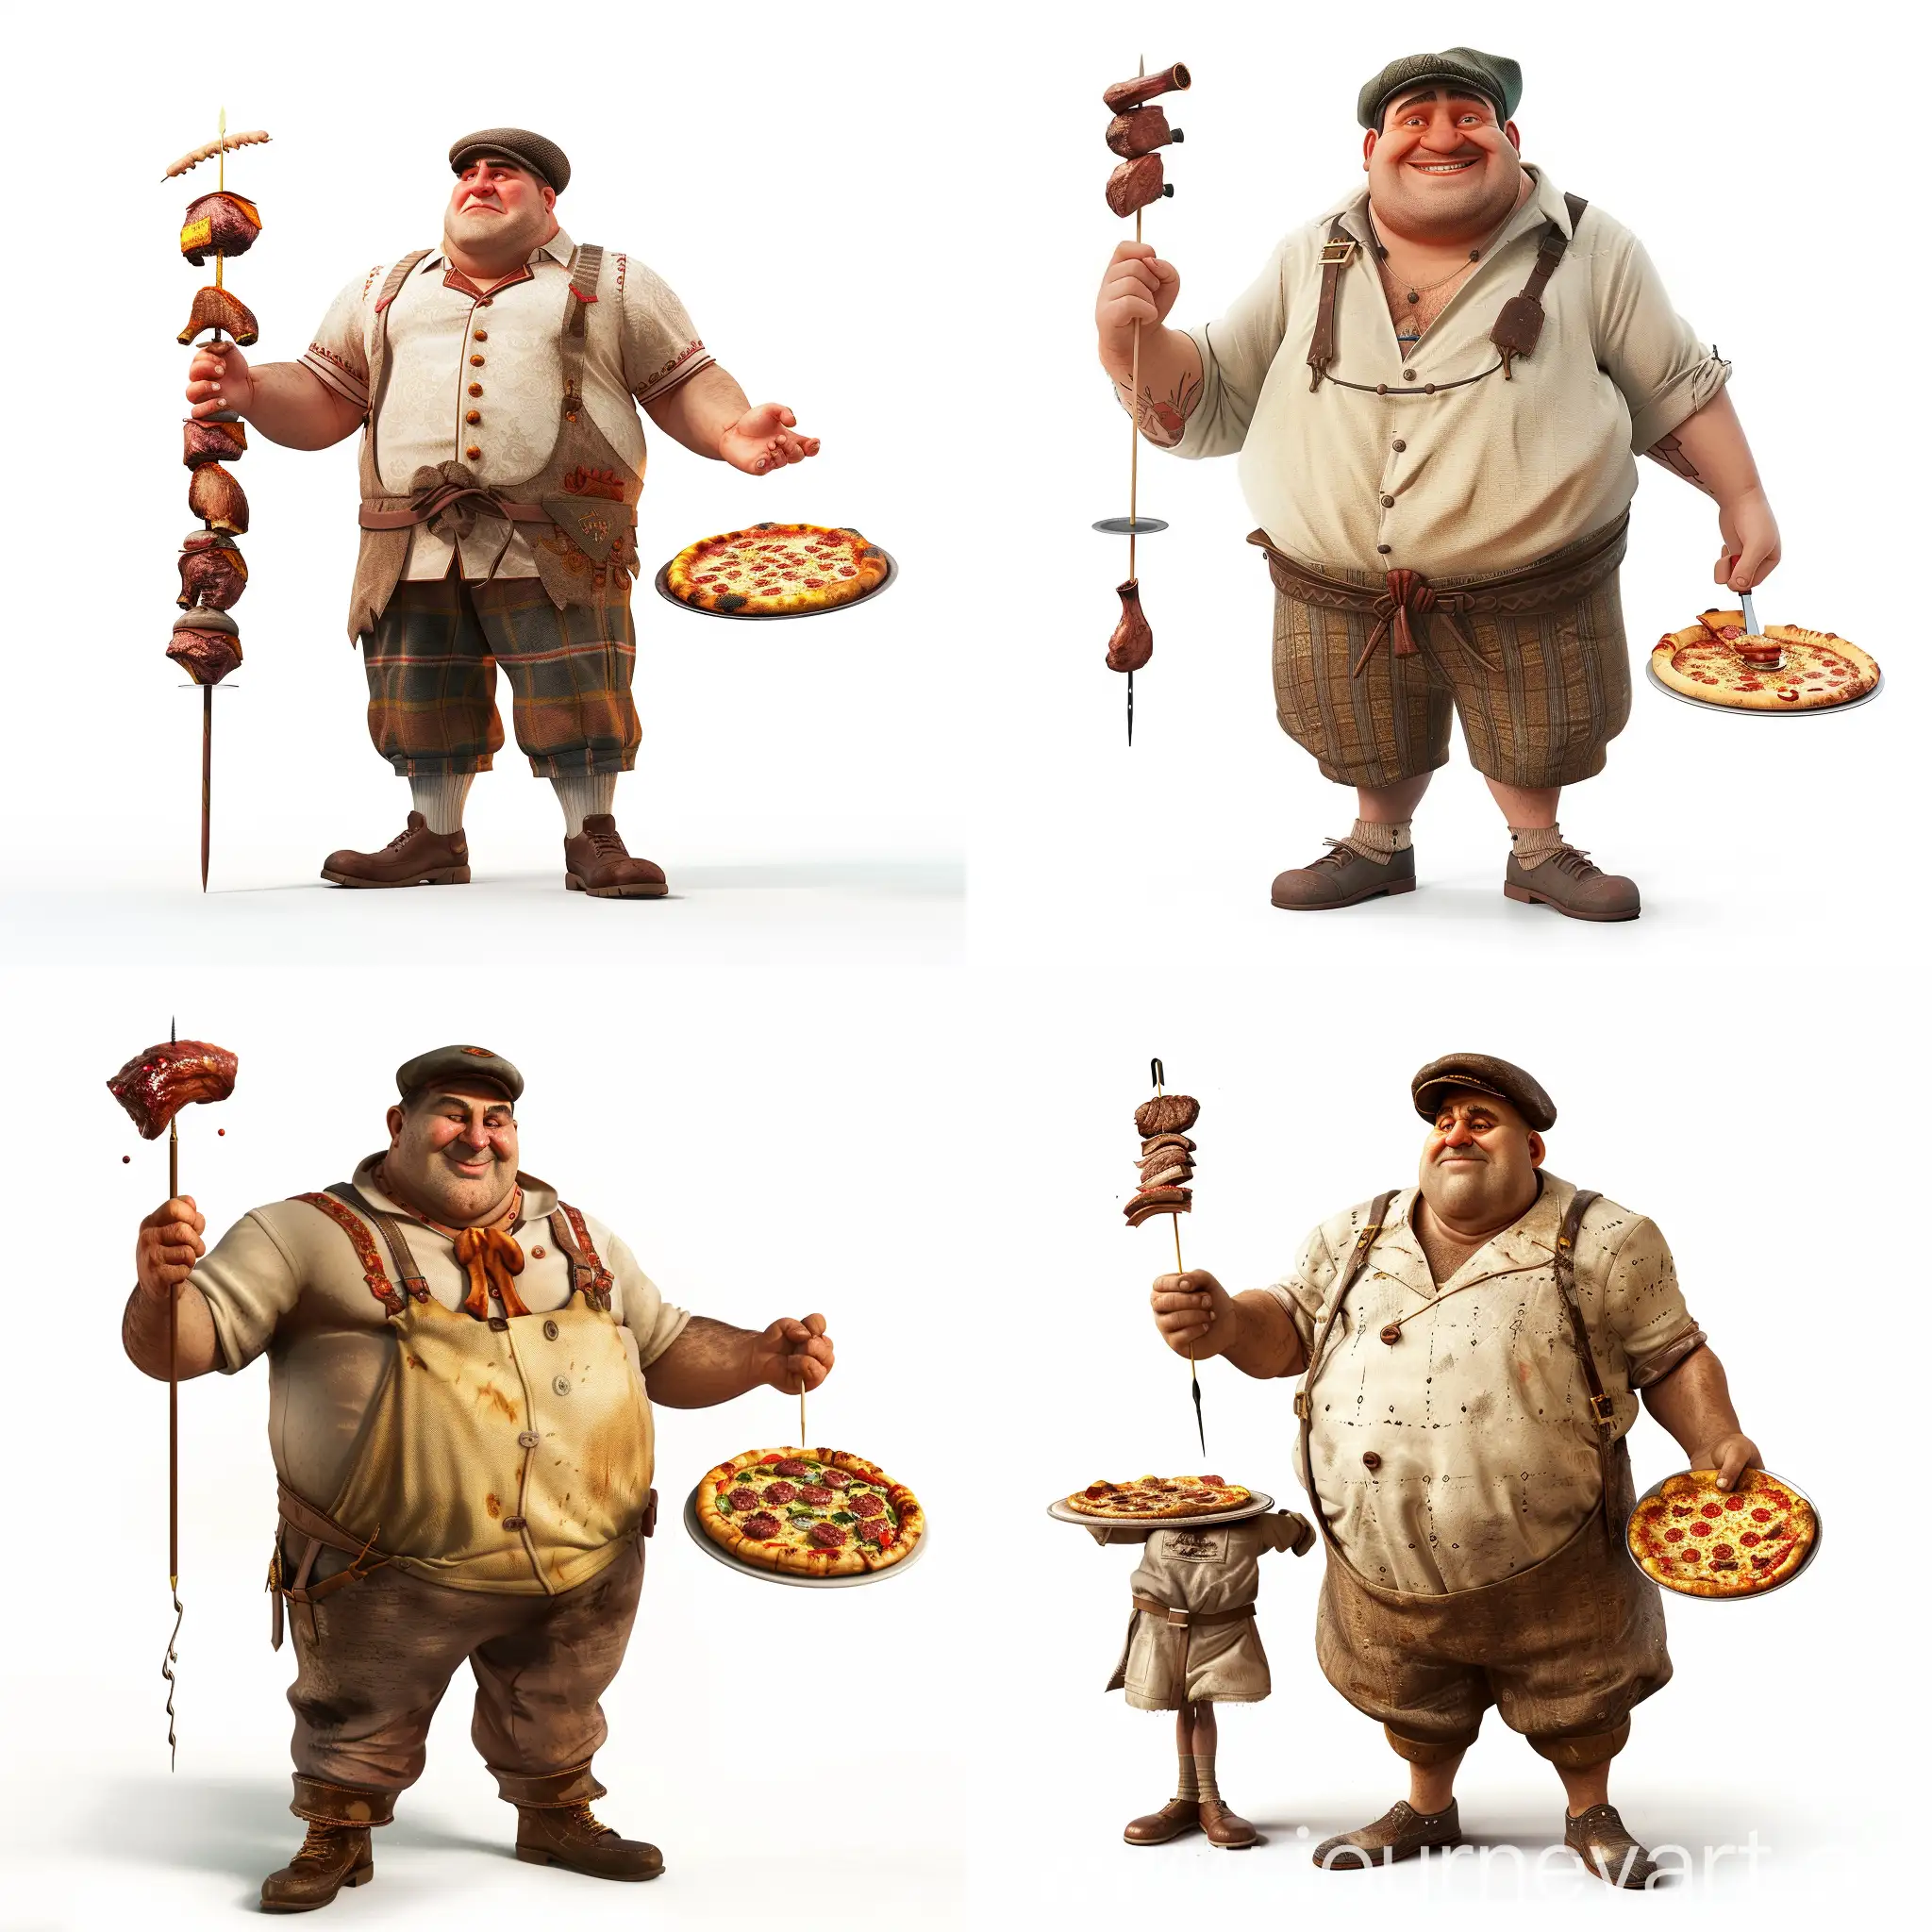 style 2d, a fat man is a cook from the Caucasus, standing tall, with a cap on his head, holding meat on a skewer in one hand, holding a pizza on a plate in the other hand, white background